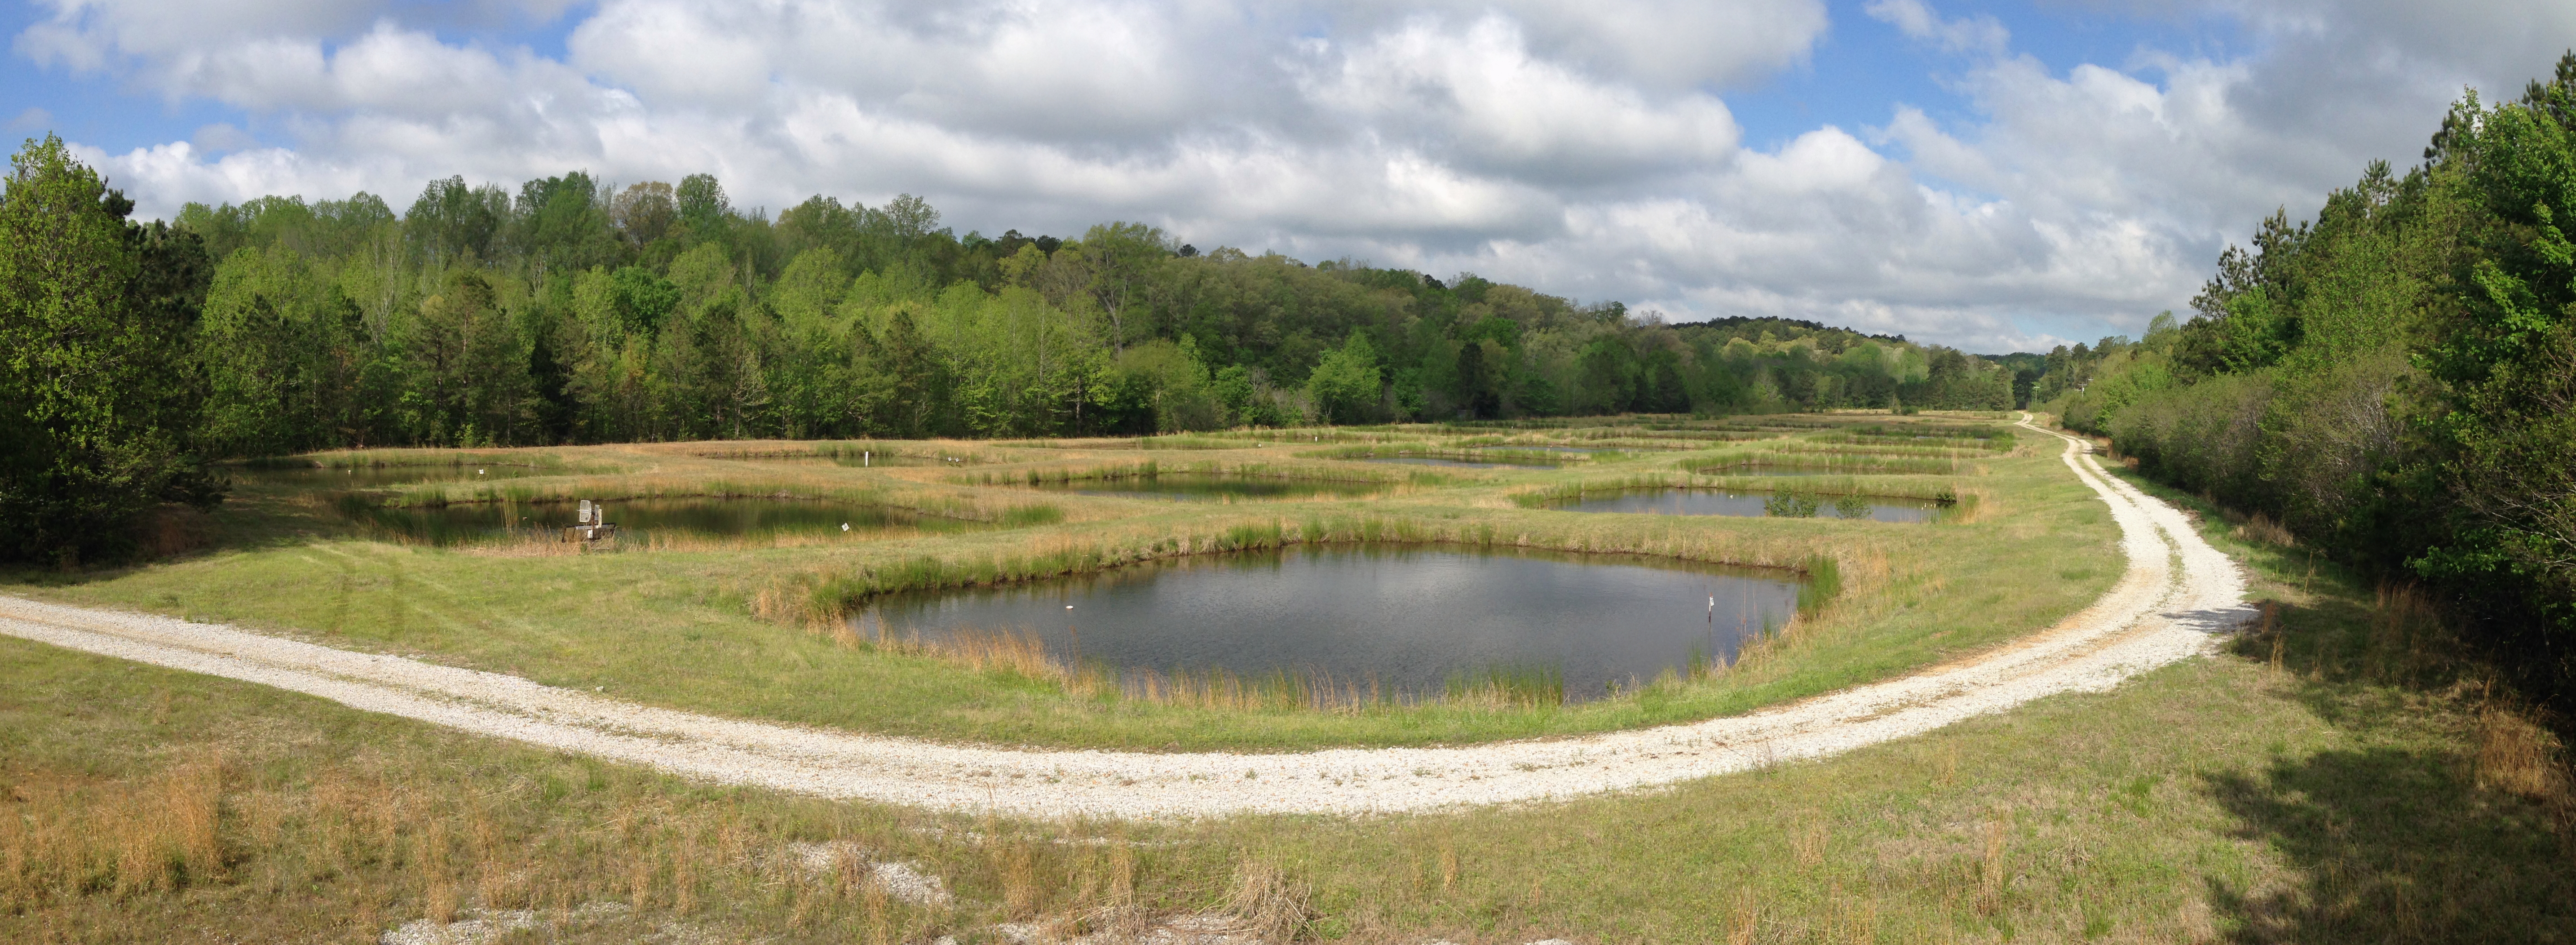 Panoramic photo of ponds and forest in spring at the University of Mississippi Field Station